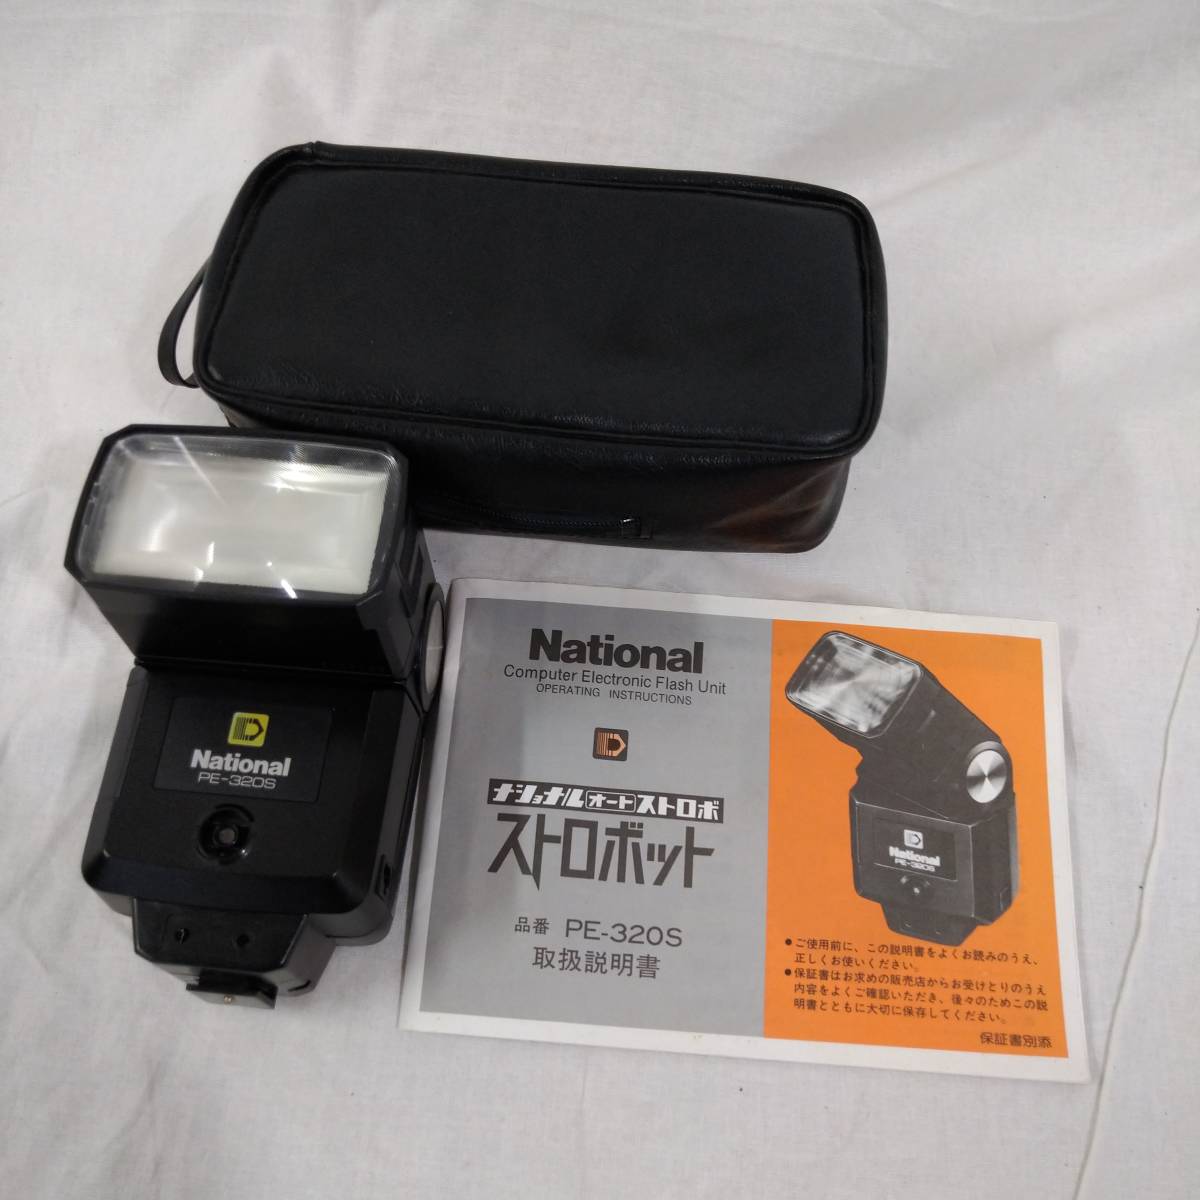 [National] National strobo toPE-320S flash strobo manual attaching [ film camera parts peripherals machinery photograph single‐lens reflex ]30